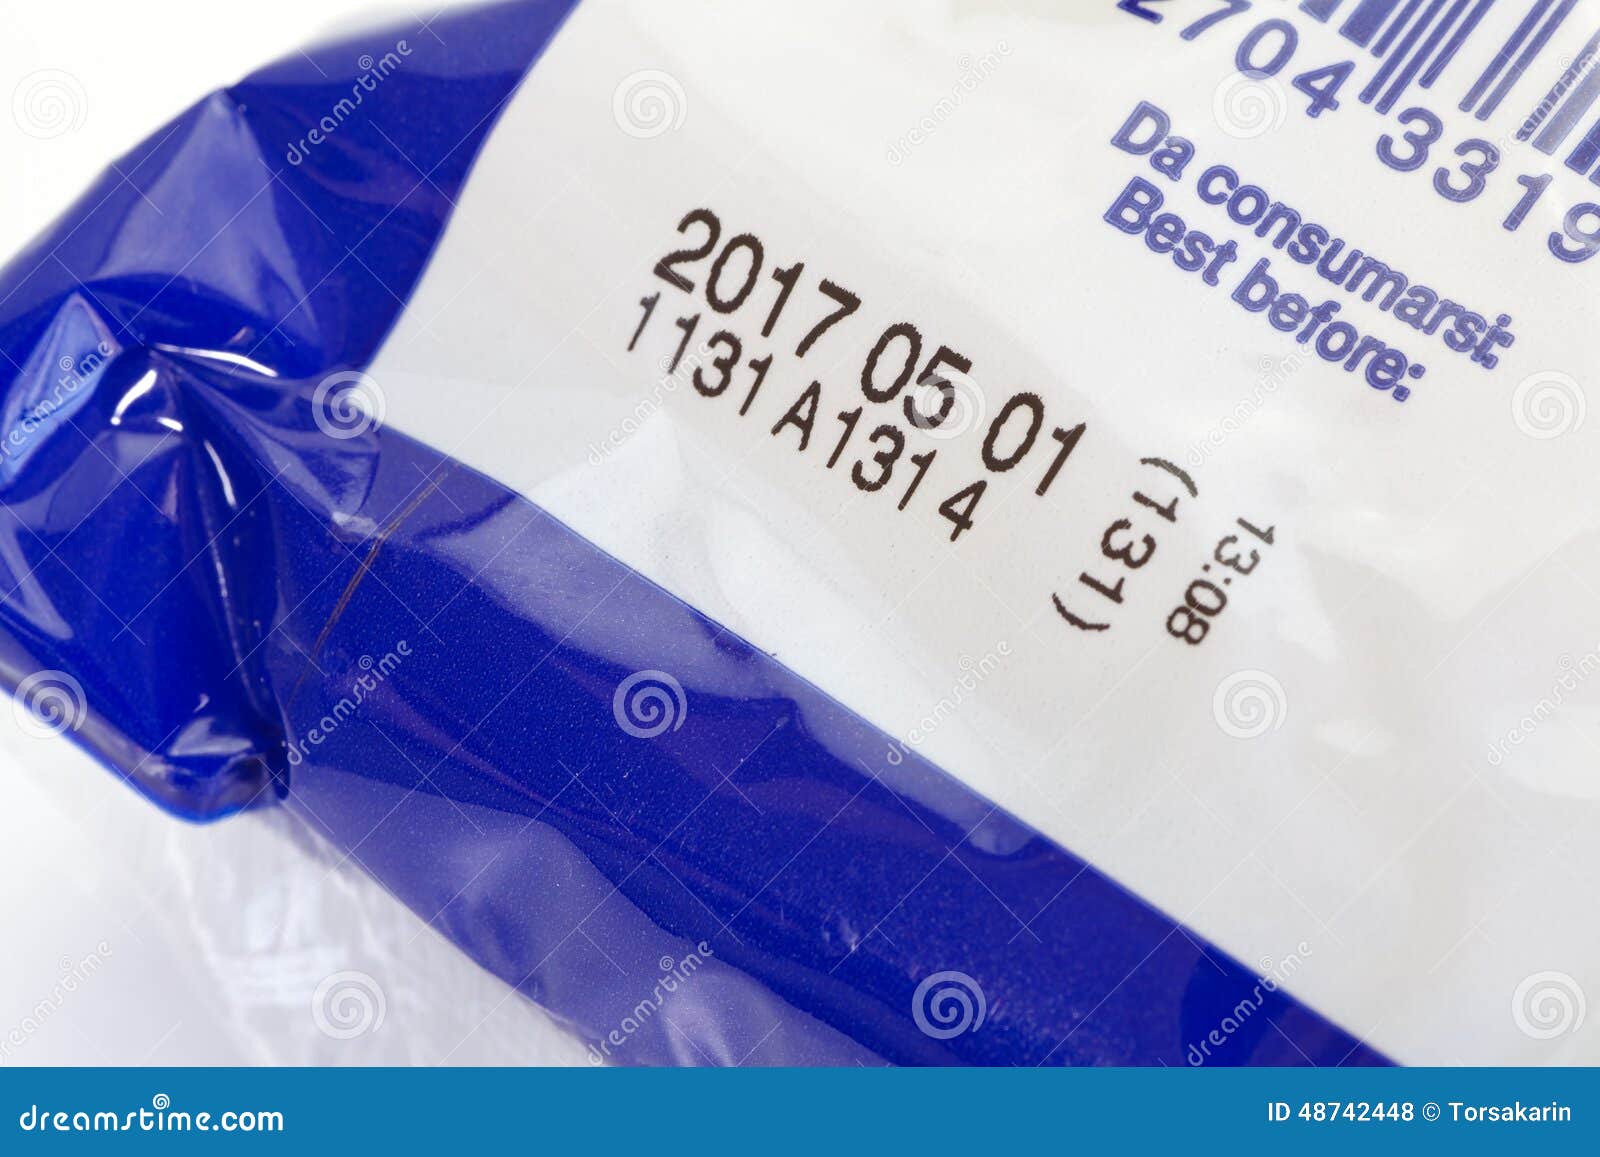 expiry-date-printed-close-up-product-packaging-48742448.jpg